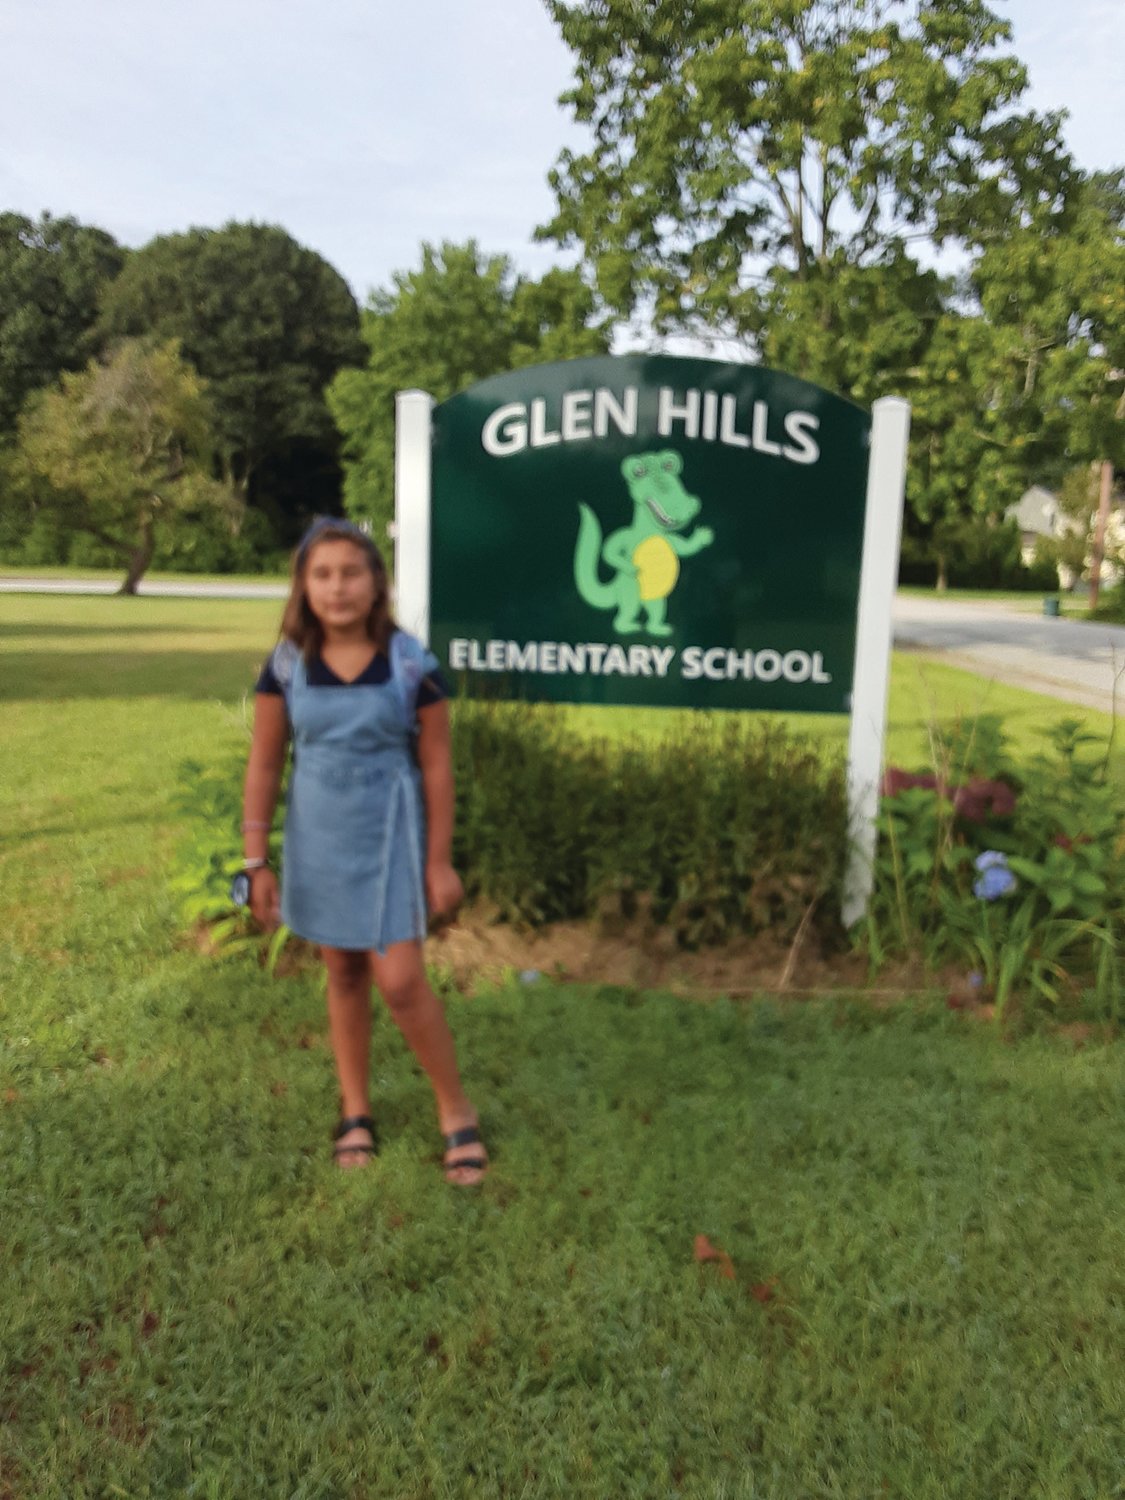 A NEW FIFTH-GRADER:  Guiliana Carley, an incoming fifth-grade student at Glen Hills Elementary School this year, posed for photos with her family as she waited for the school day to begin.